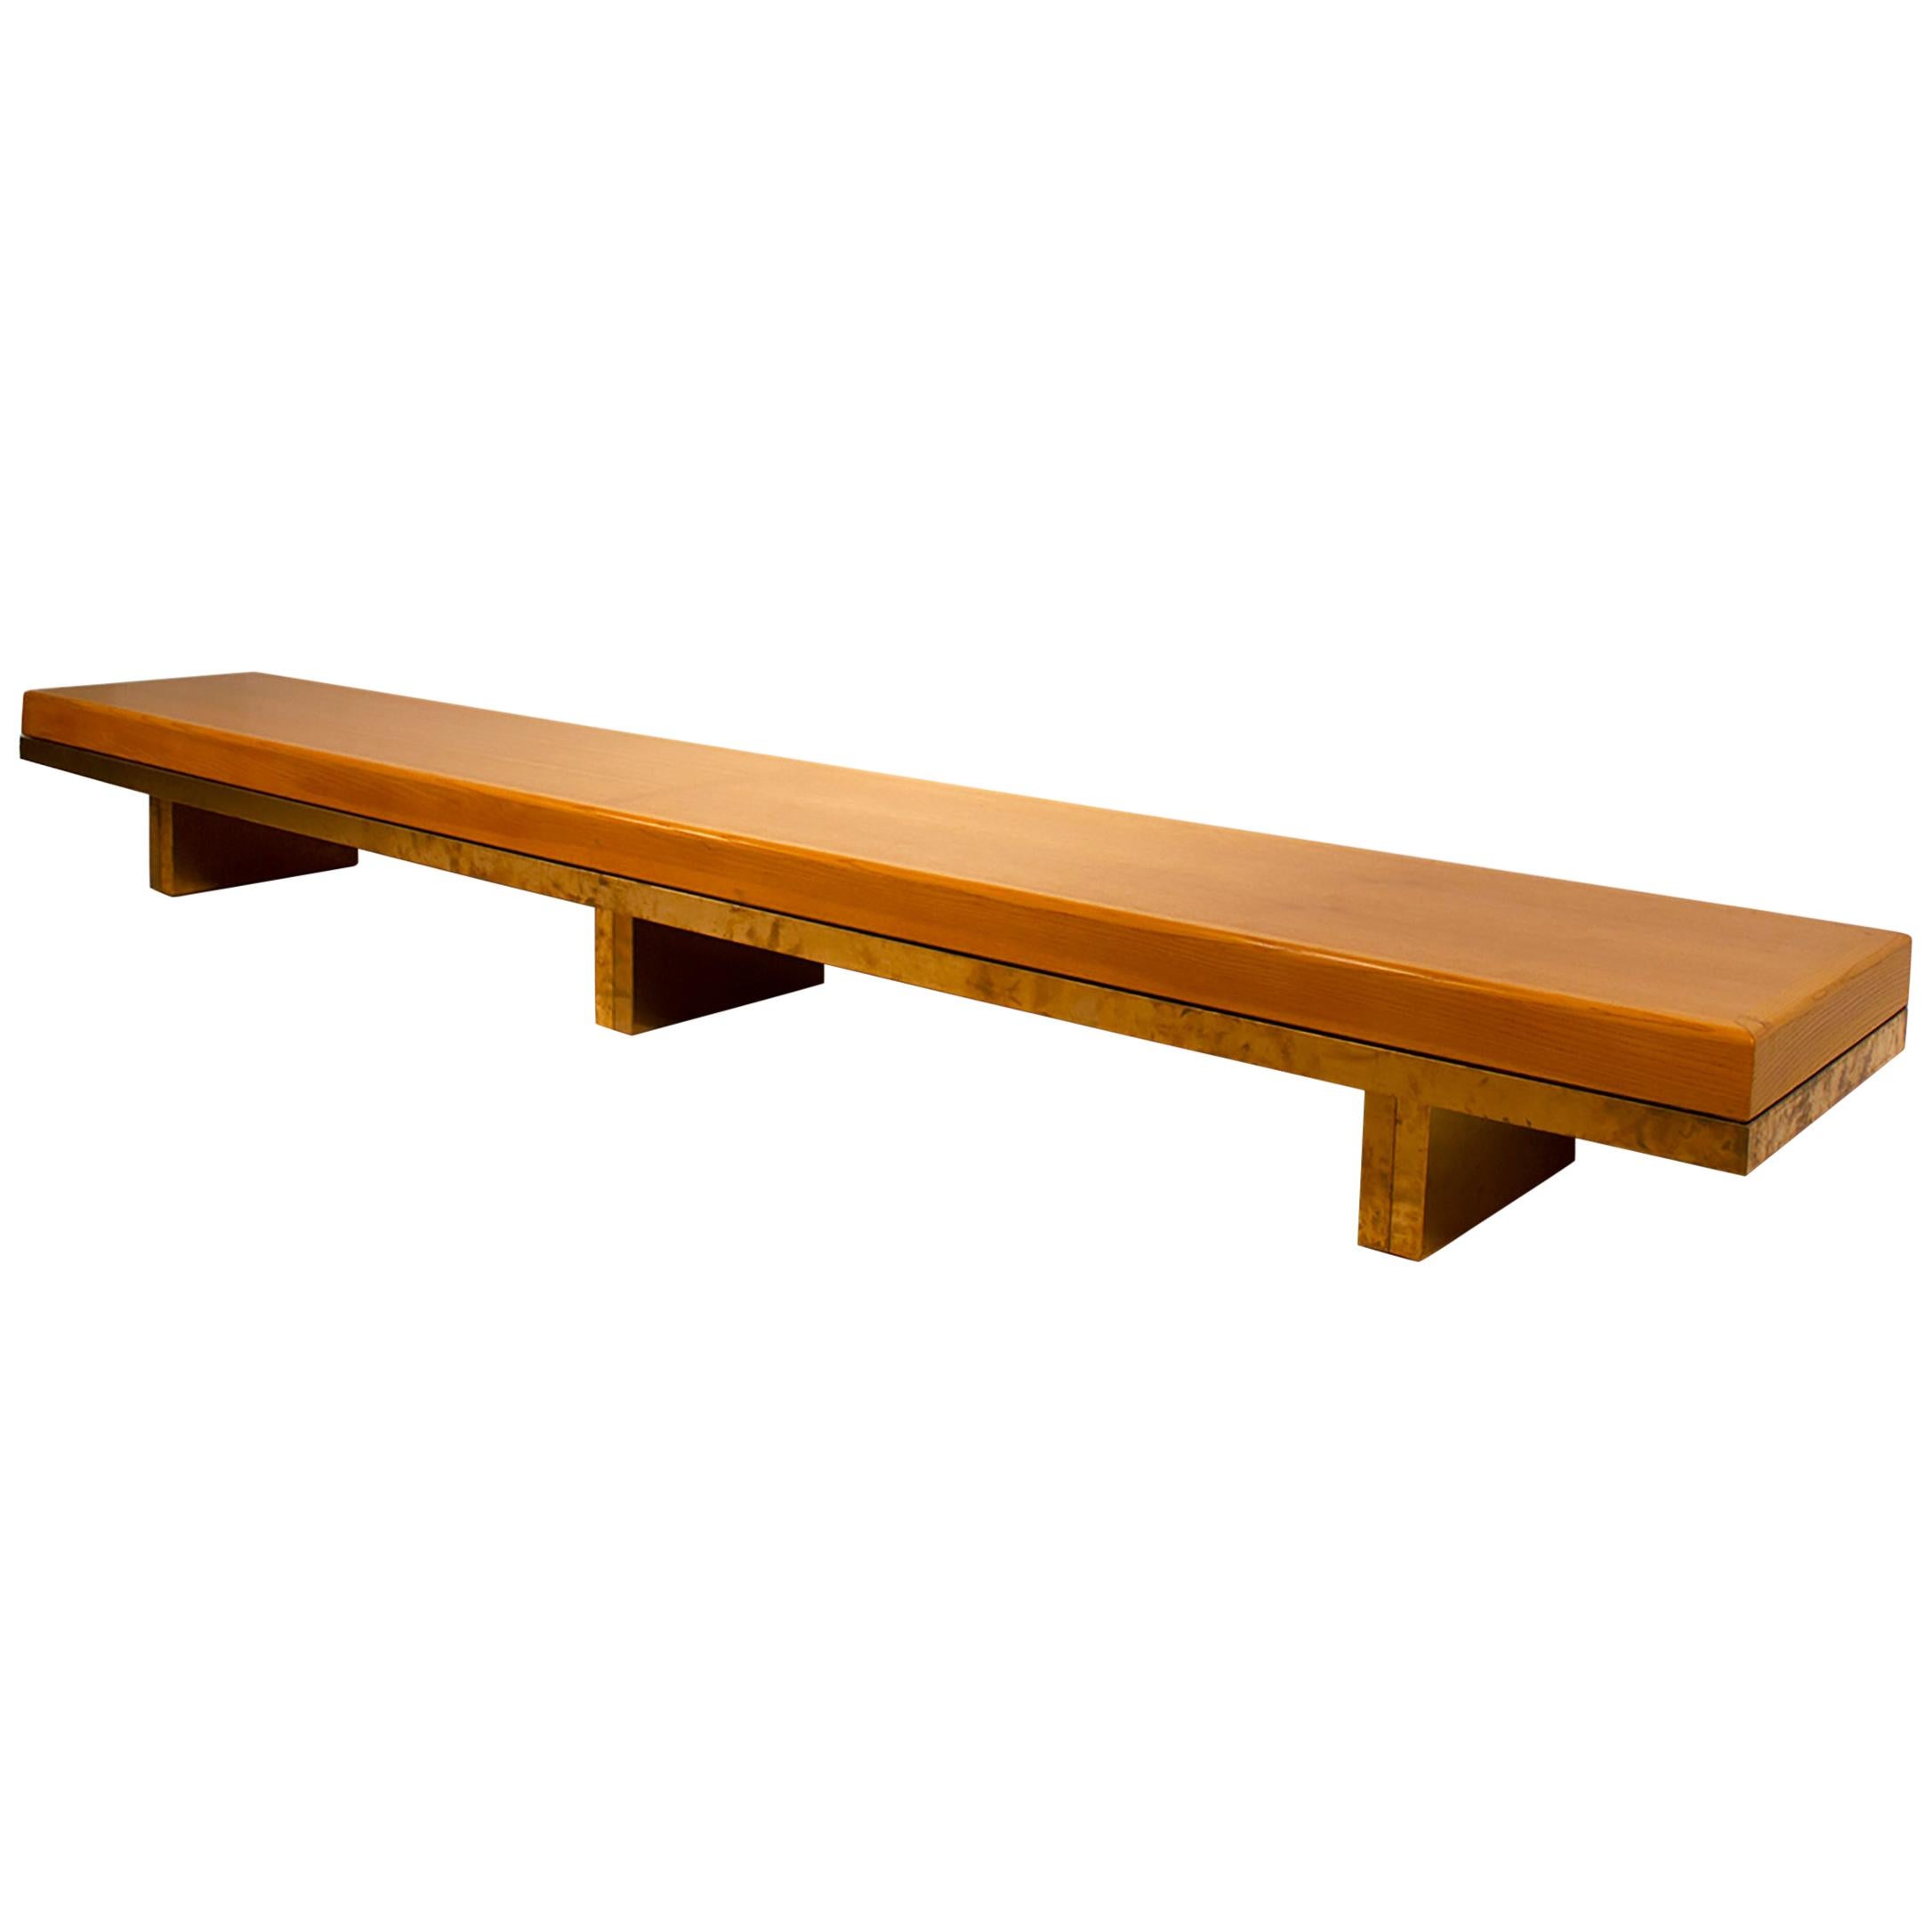 Architectural Bench from the Iconic I.M. Pei Dallas City Hall For Sale